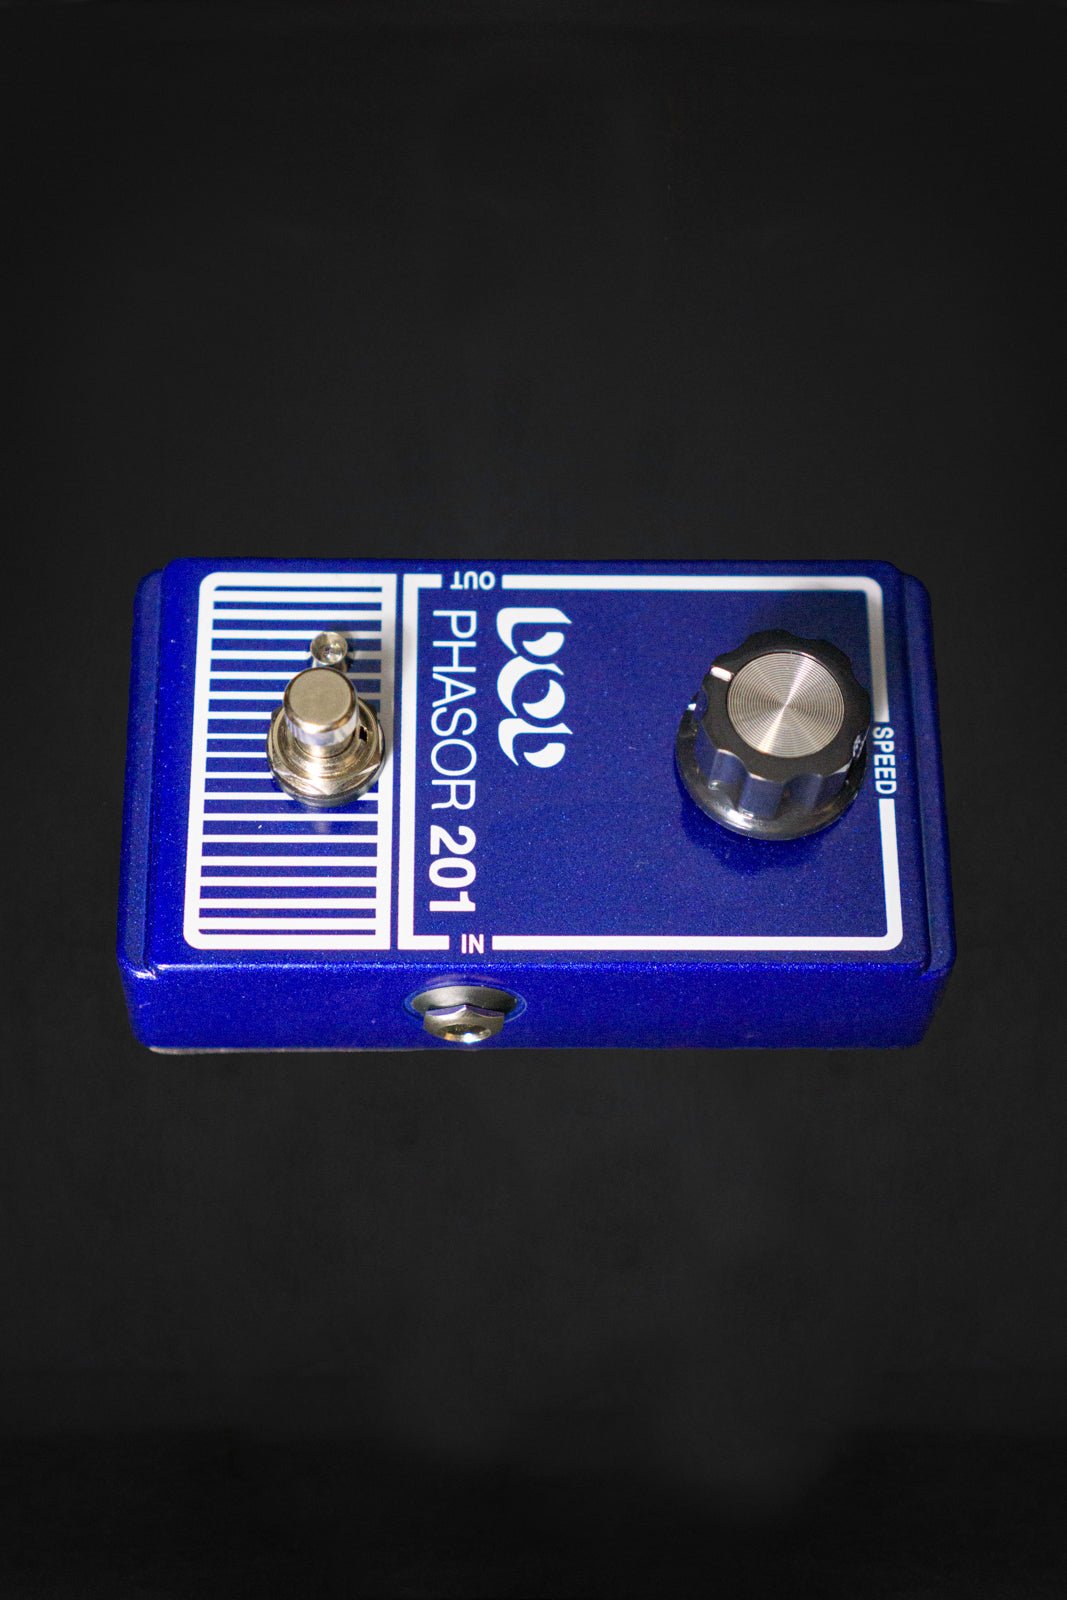 DOD Phasor 201 Pedal - Effects Pedals - DOD